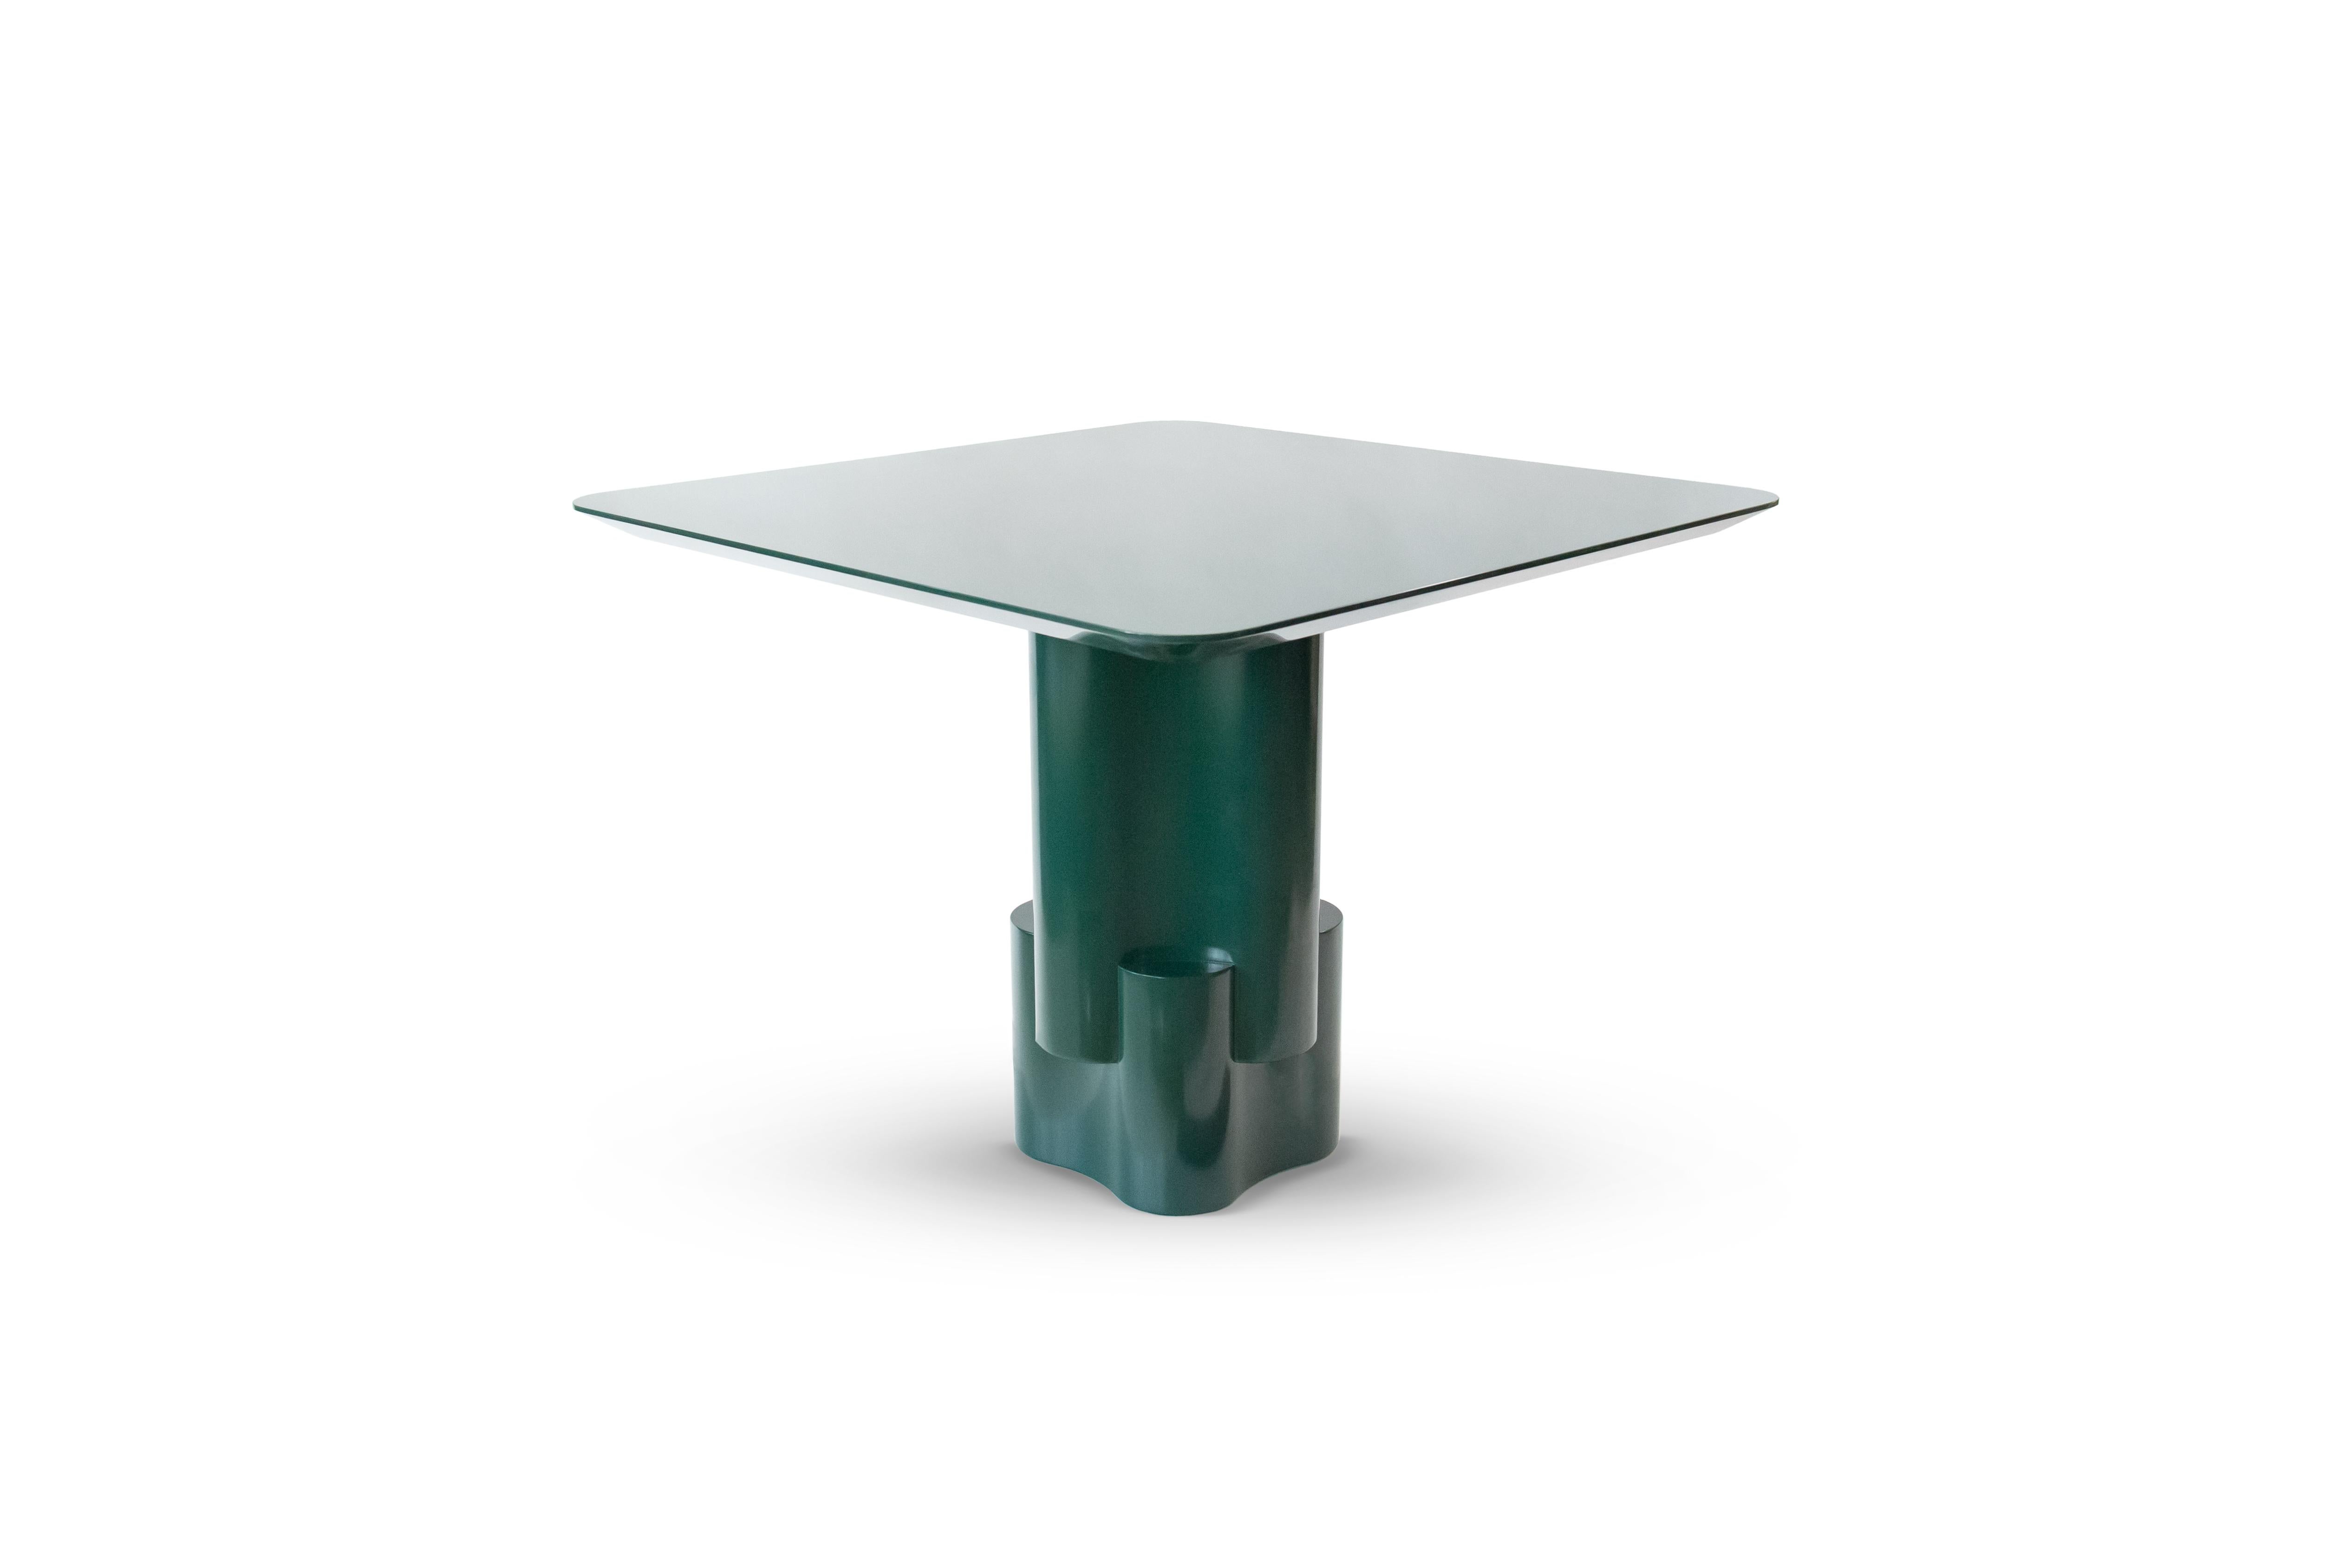 American Green Lacquered Tsugime Pedestal Table by Chapter & Verse For Sale